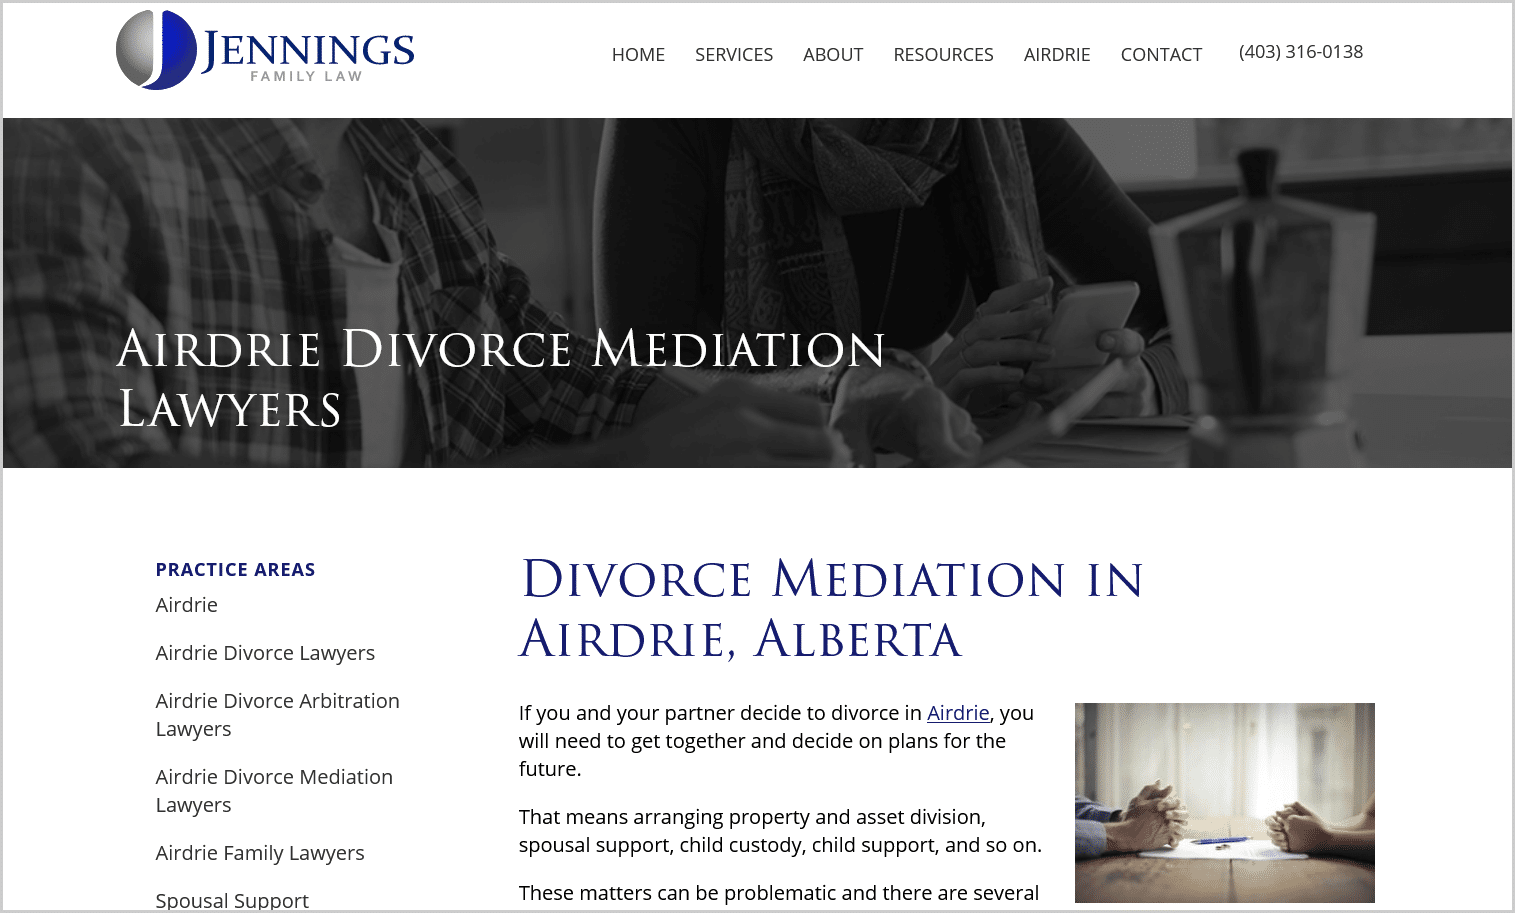 Airdrie_Divorce_Mediation_Lawyers_Jennings_Family_Law